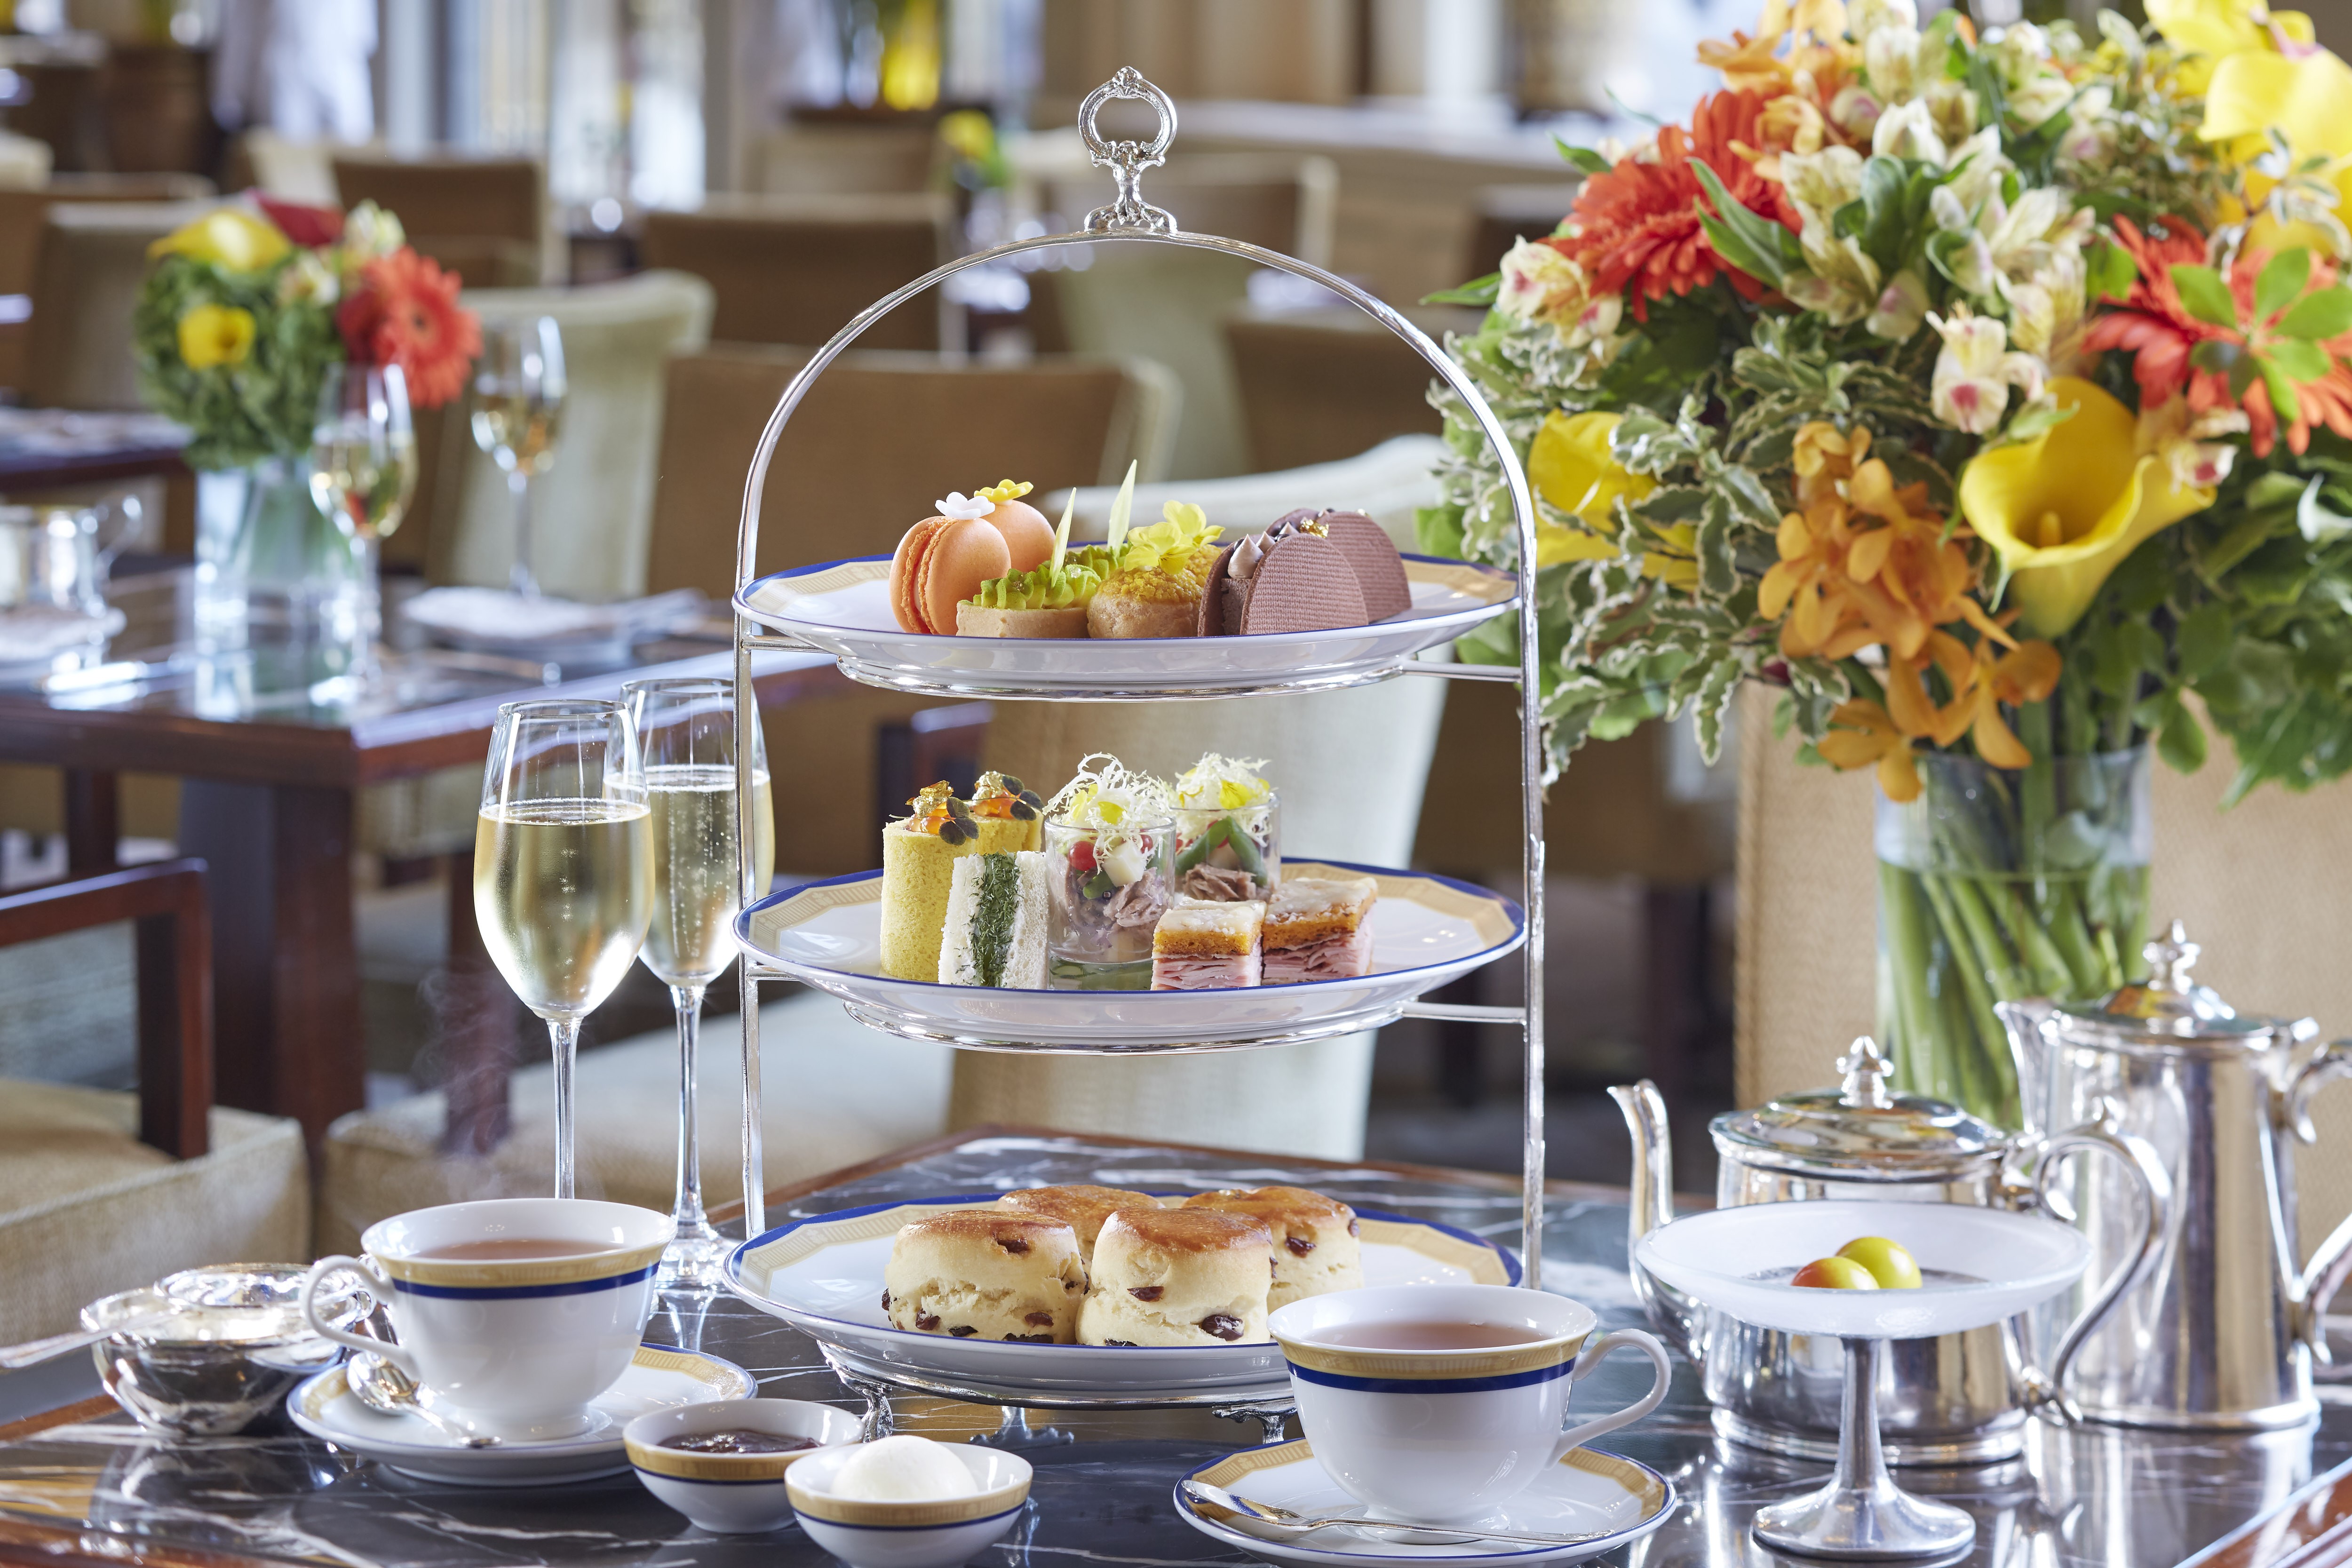 The Peninsula partners with Van Cleef & Arpels to launch a nature-inspired afternoon tea